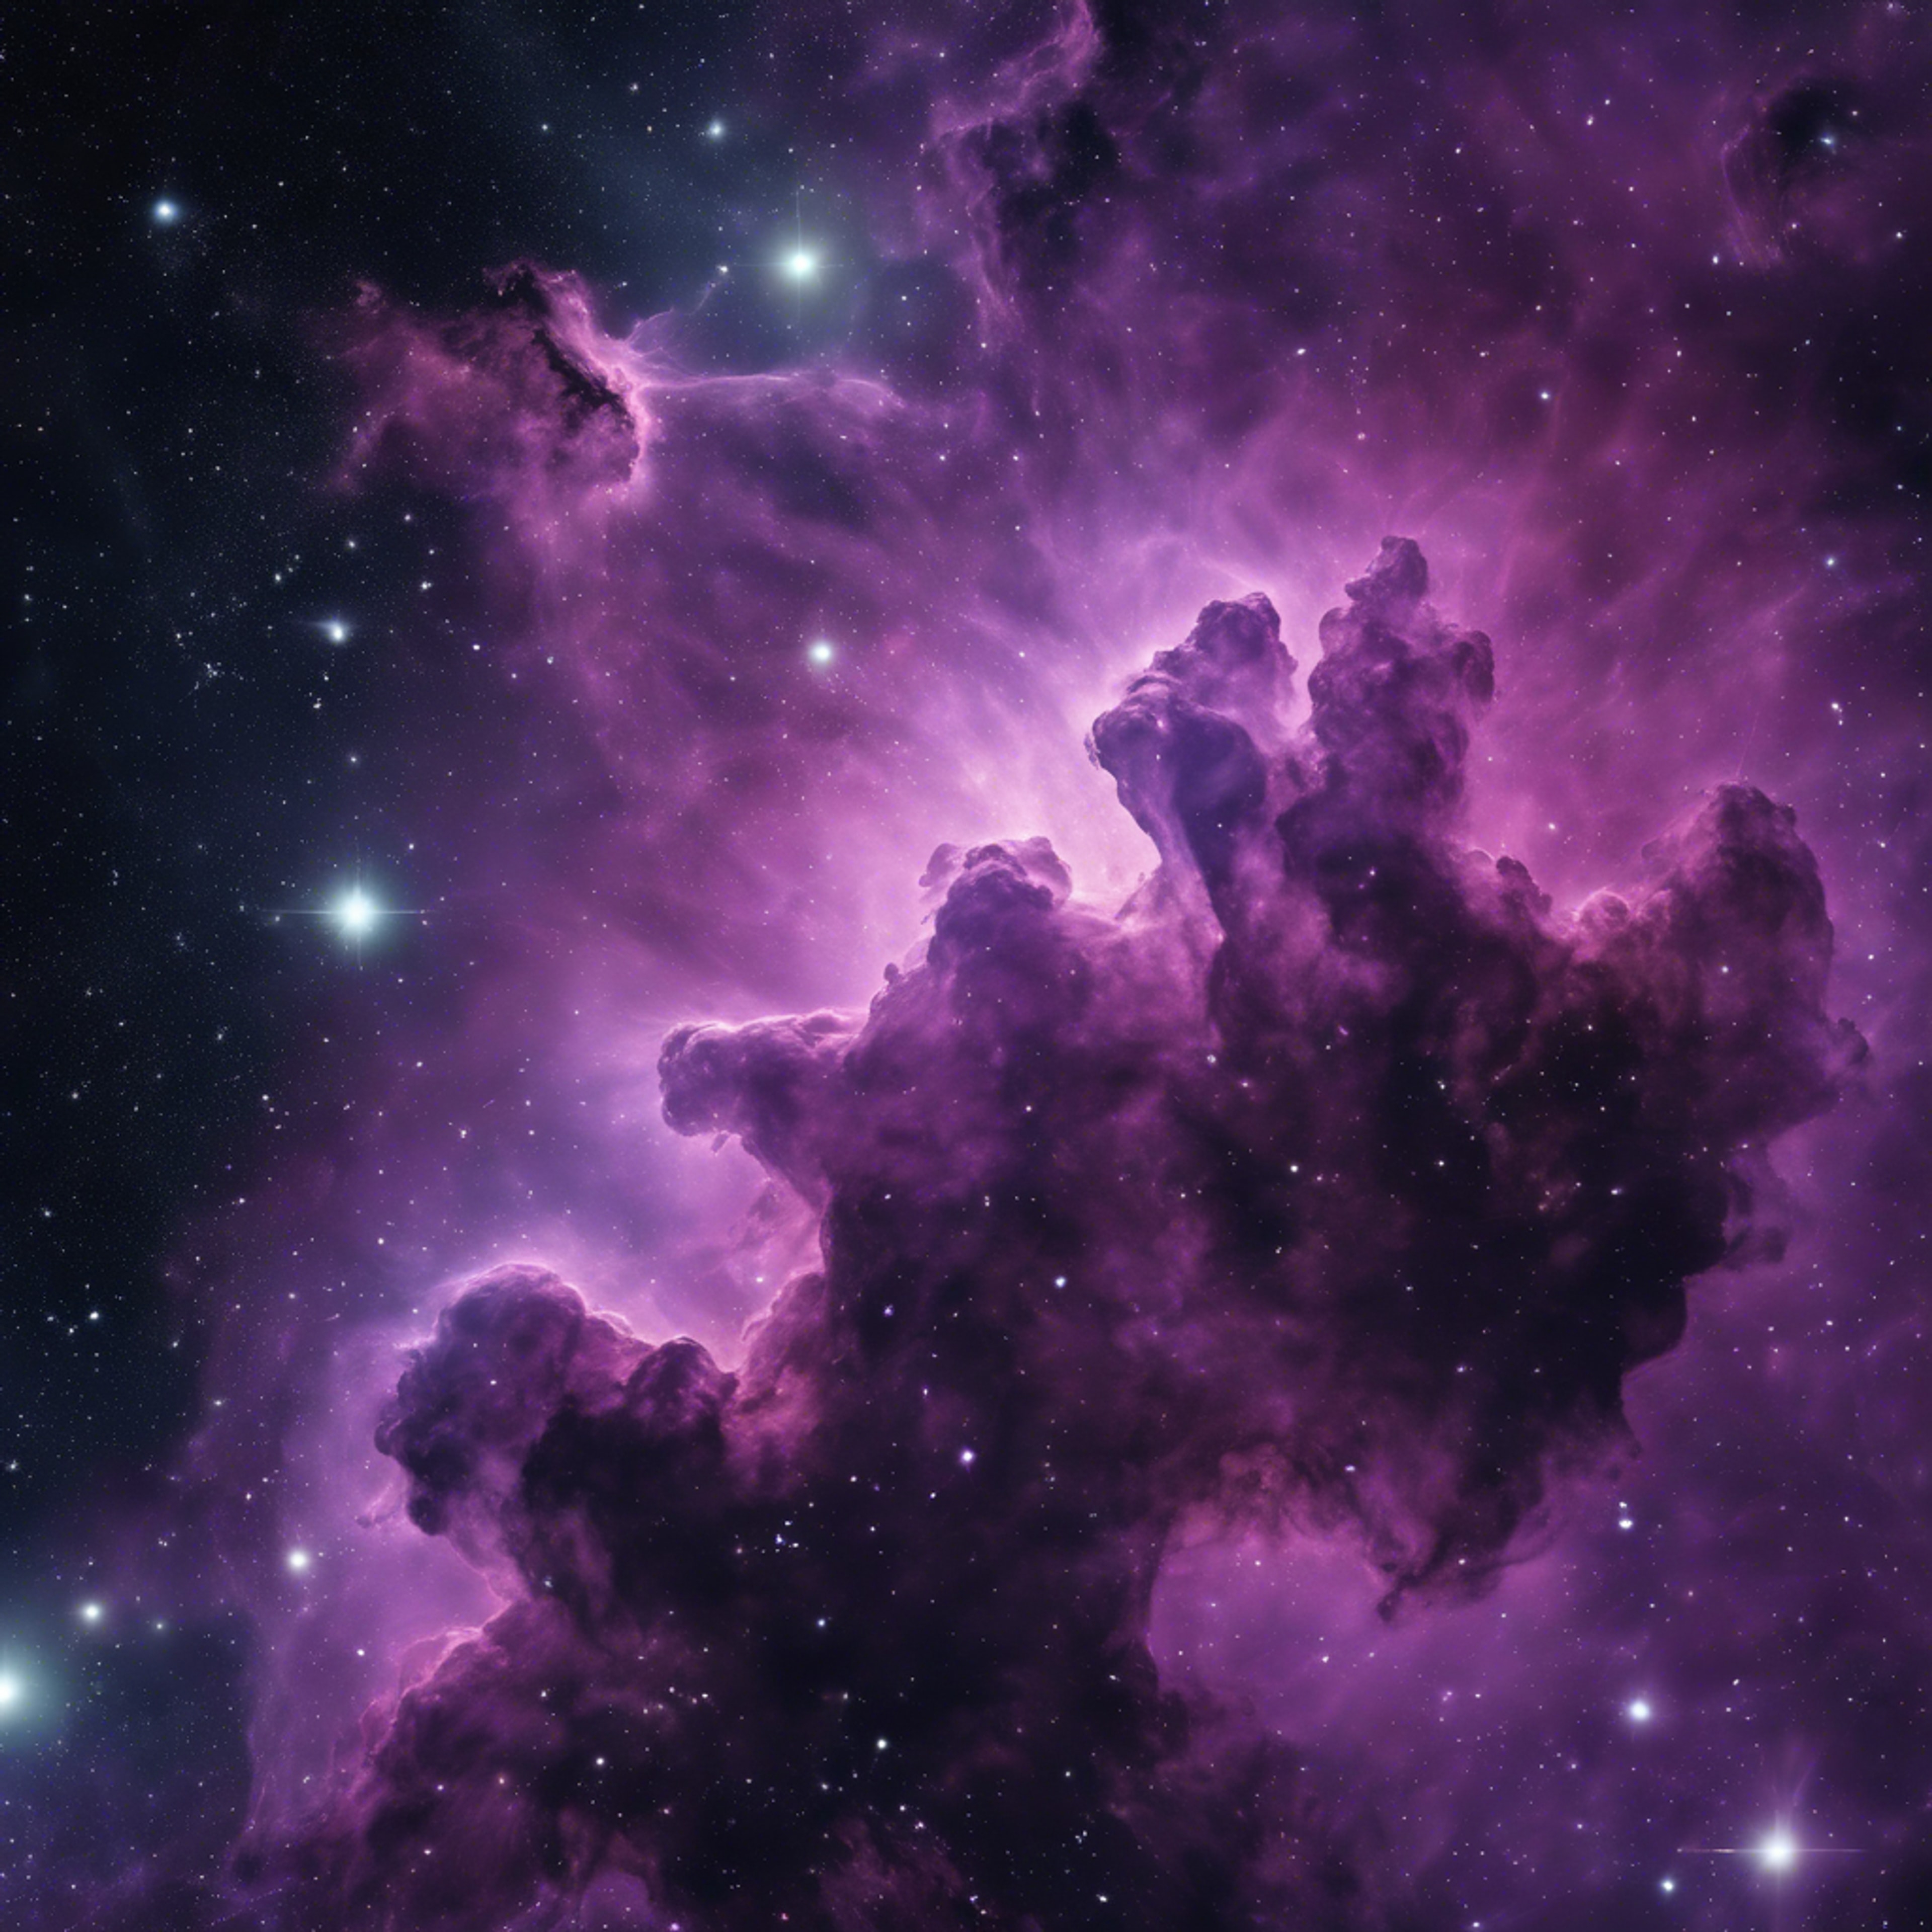 A nebula in space with black voids, and purple, star-lit clouds of gas and dust. Wallpaper[3e7a619716144d8ba851]